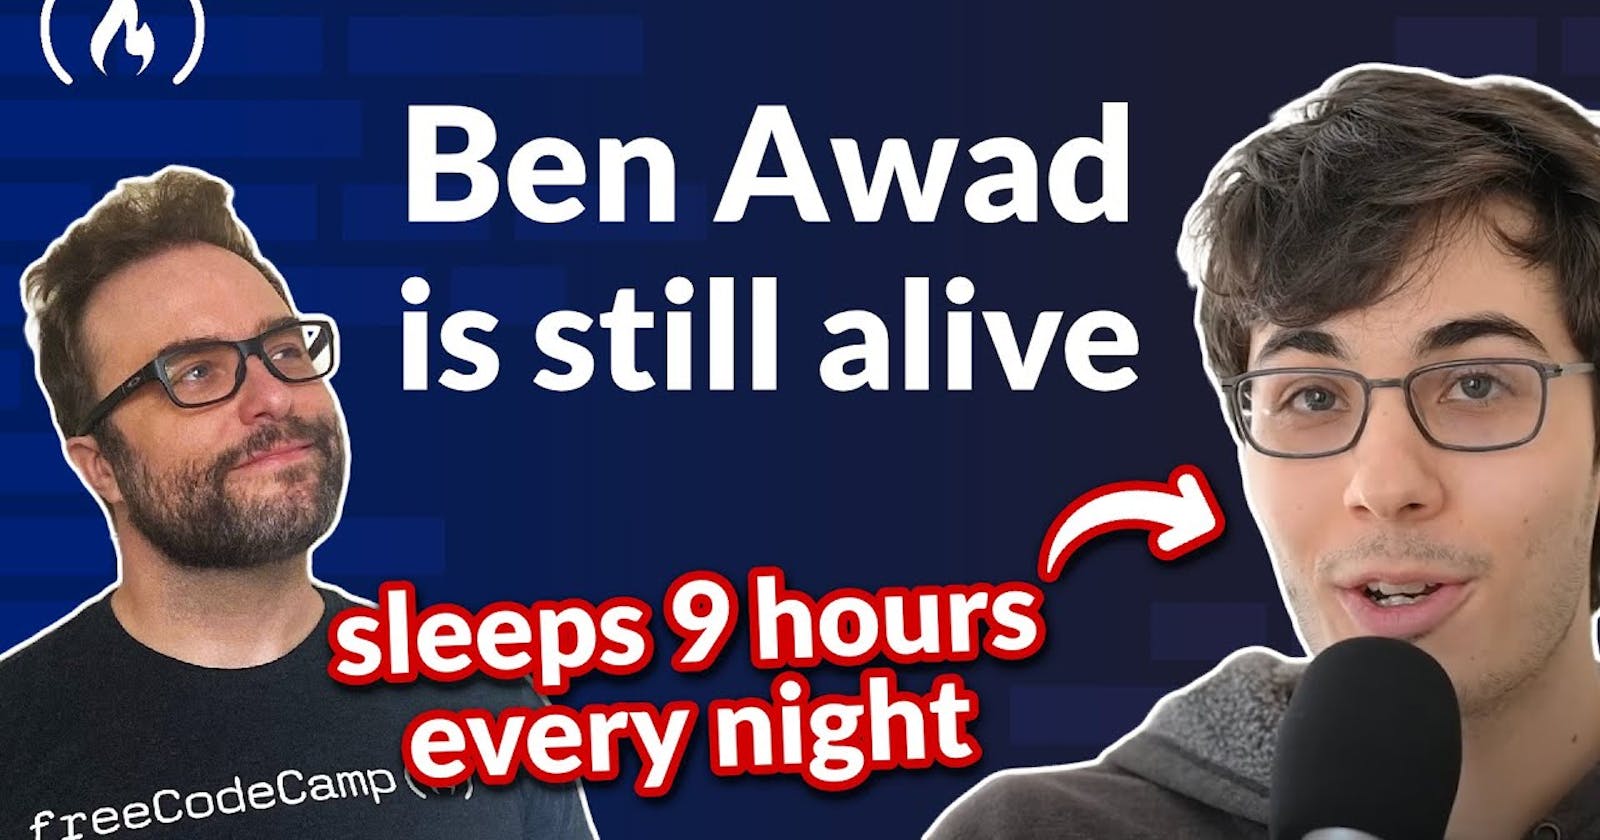 Ben Awad is a GameDev Who Sleeps 9 Hours EVERY NIGHT to be Productive [Podcast #121]